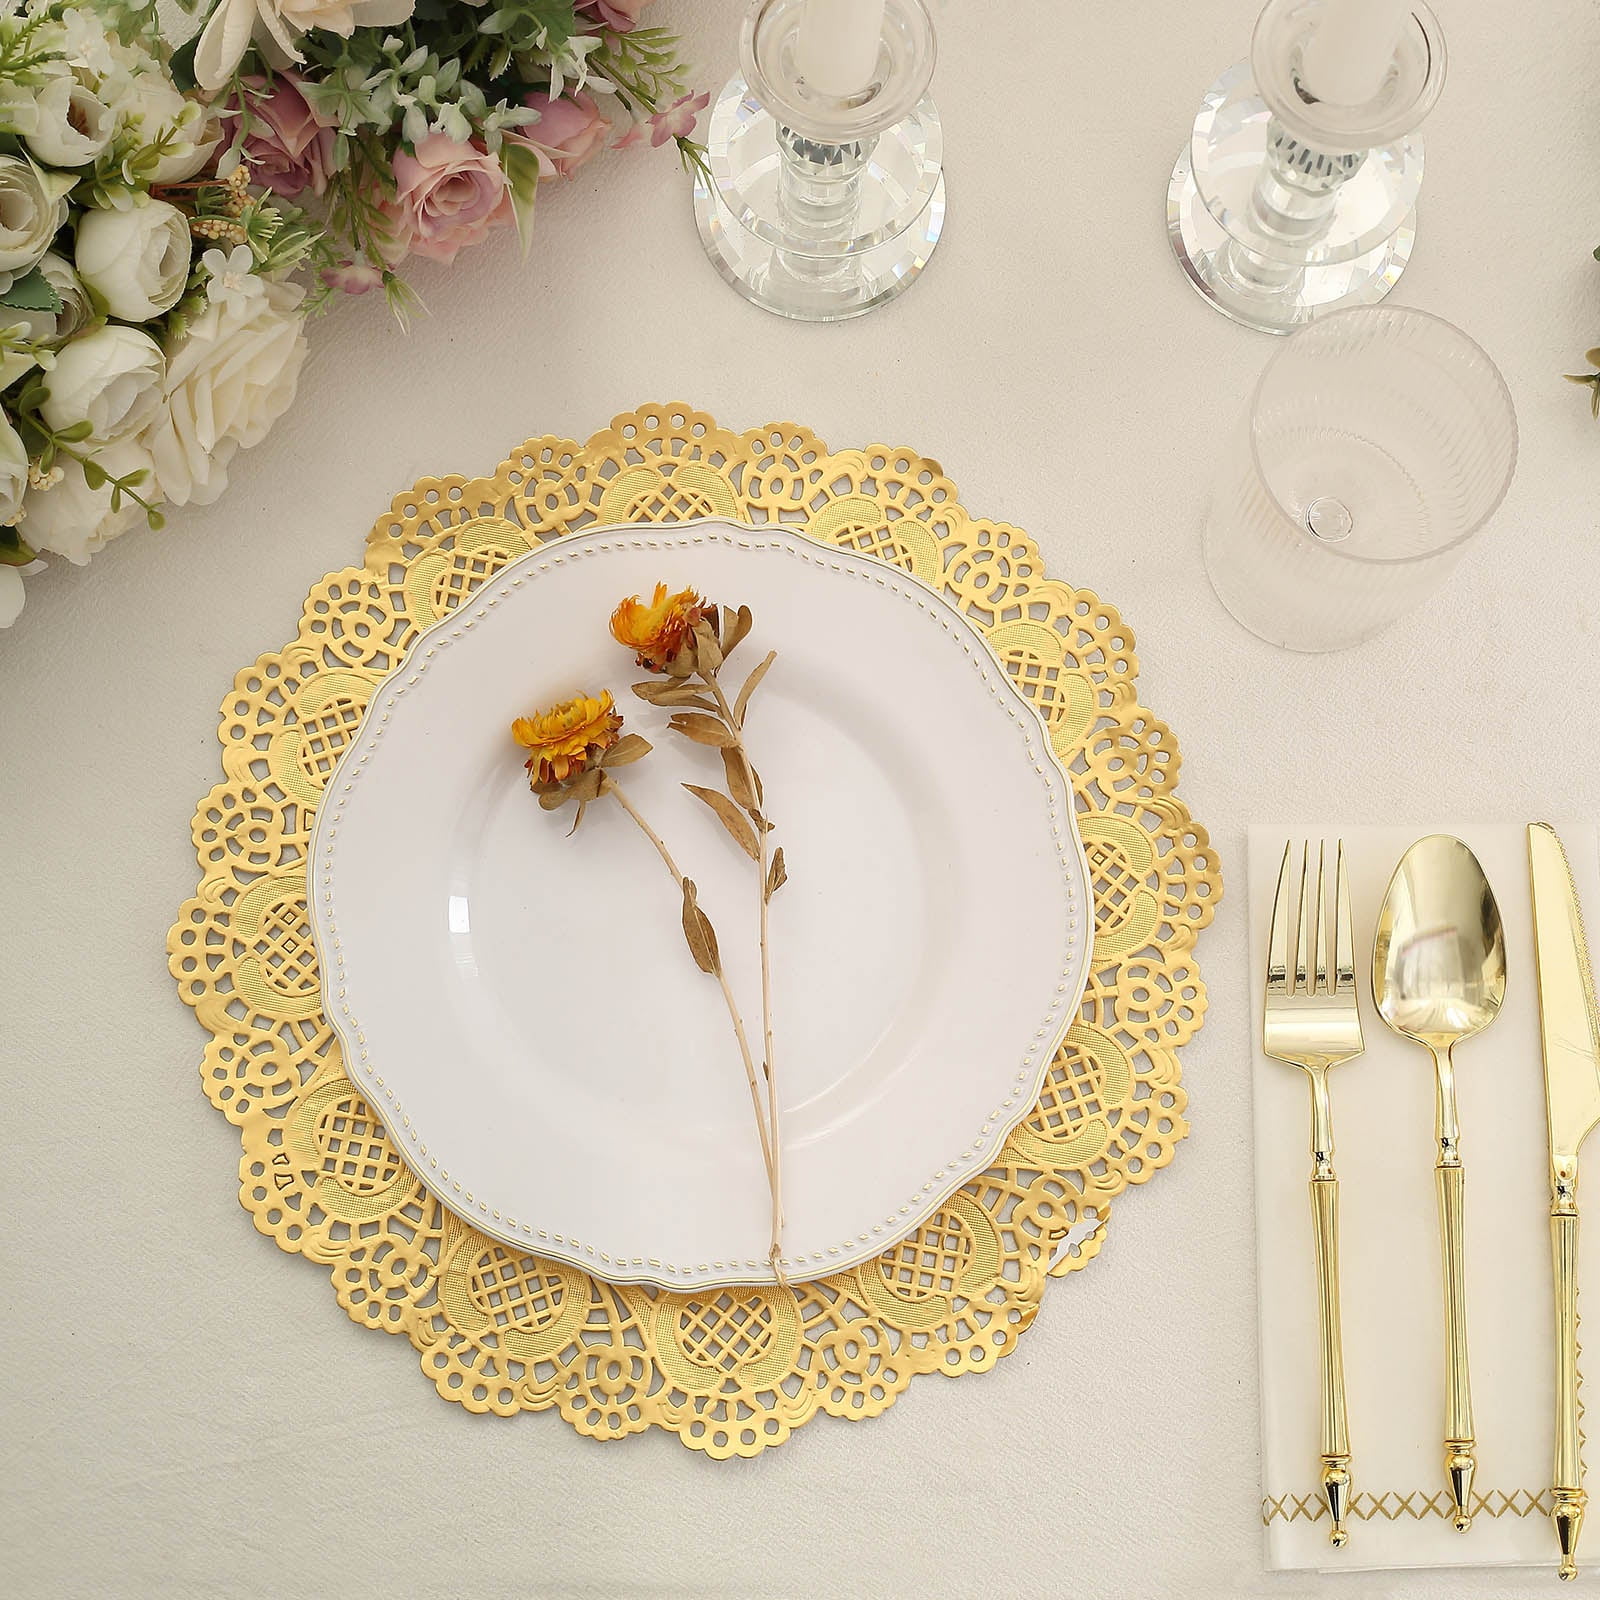 Tim&Lin White Lace Paper Doilies - 4 inch Round Paper Doilies - Disposable  Paper Placemats - for Wedding, Birthday